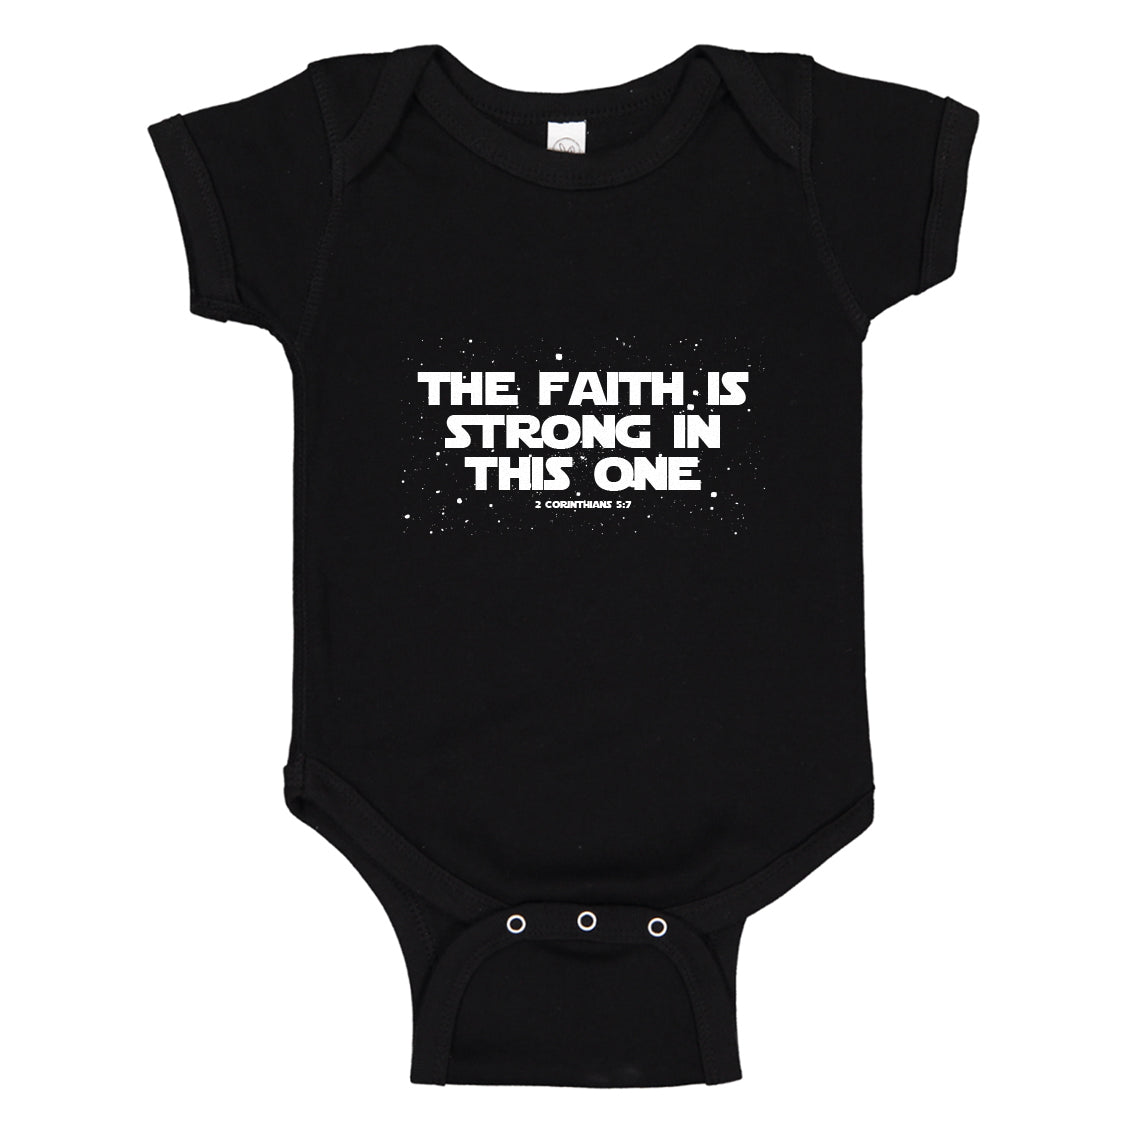 Baby Onesie The Faith is Strong in This One 100% Cotton Infant Bodysuit